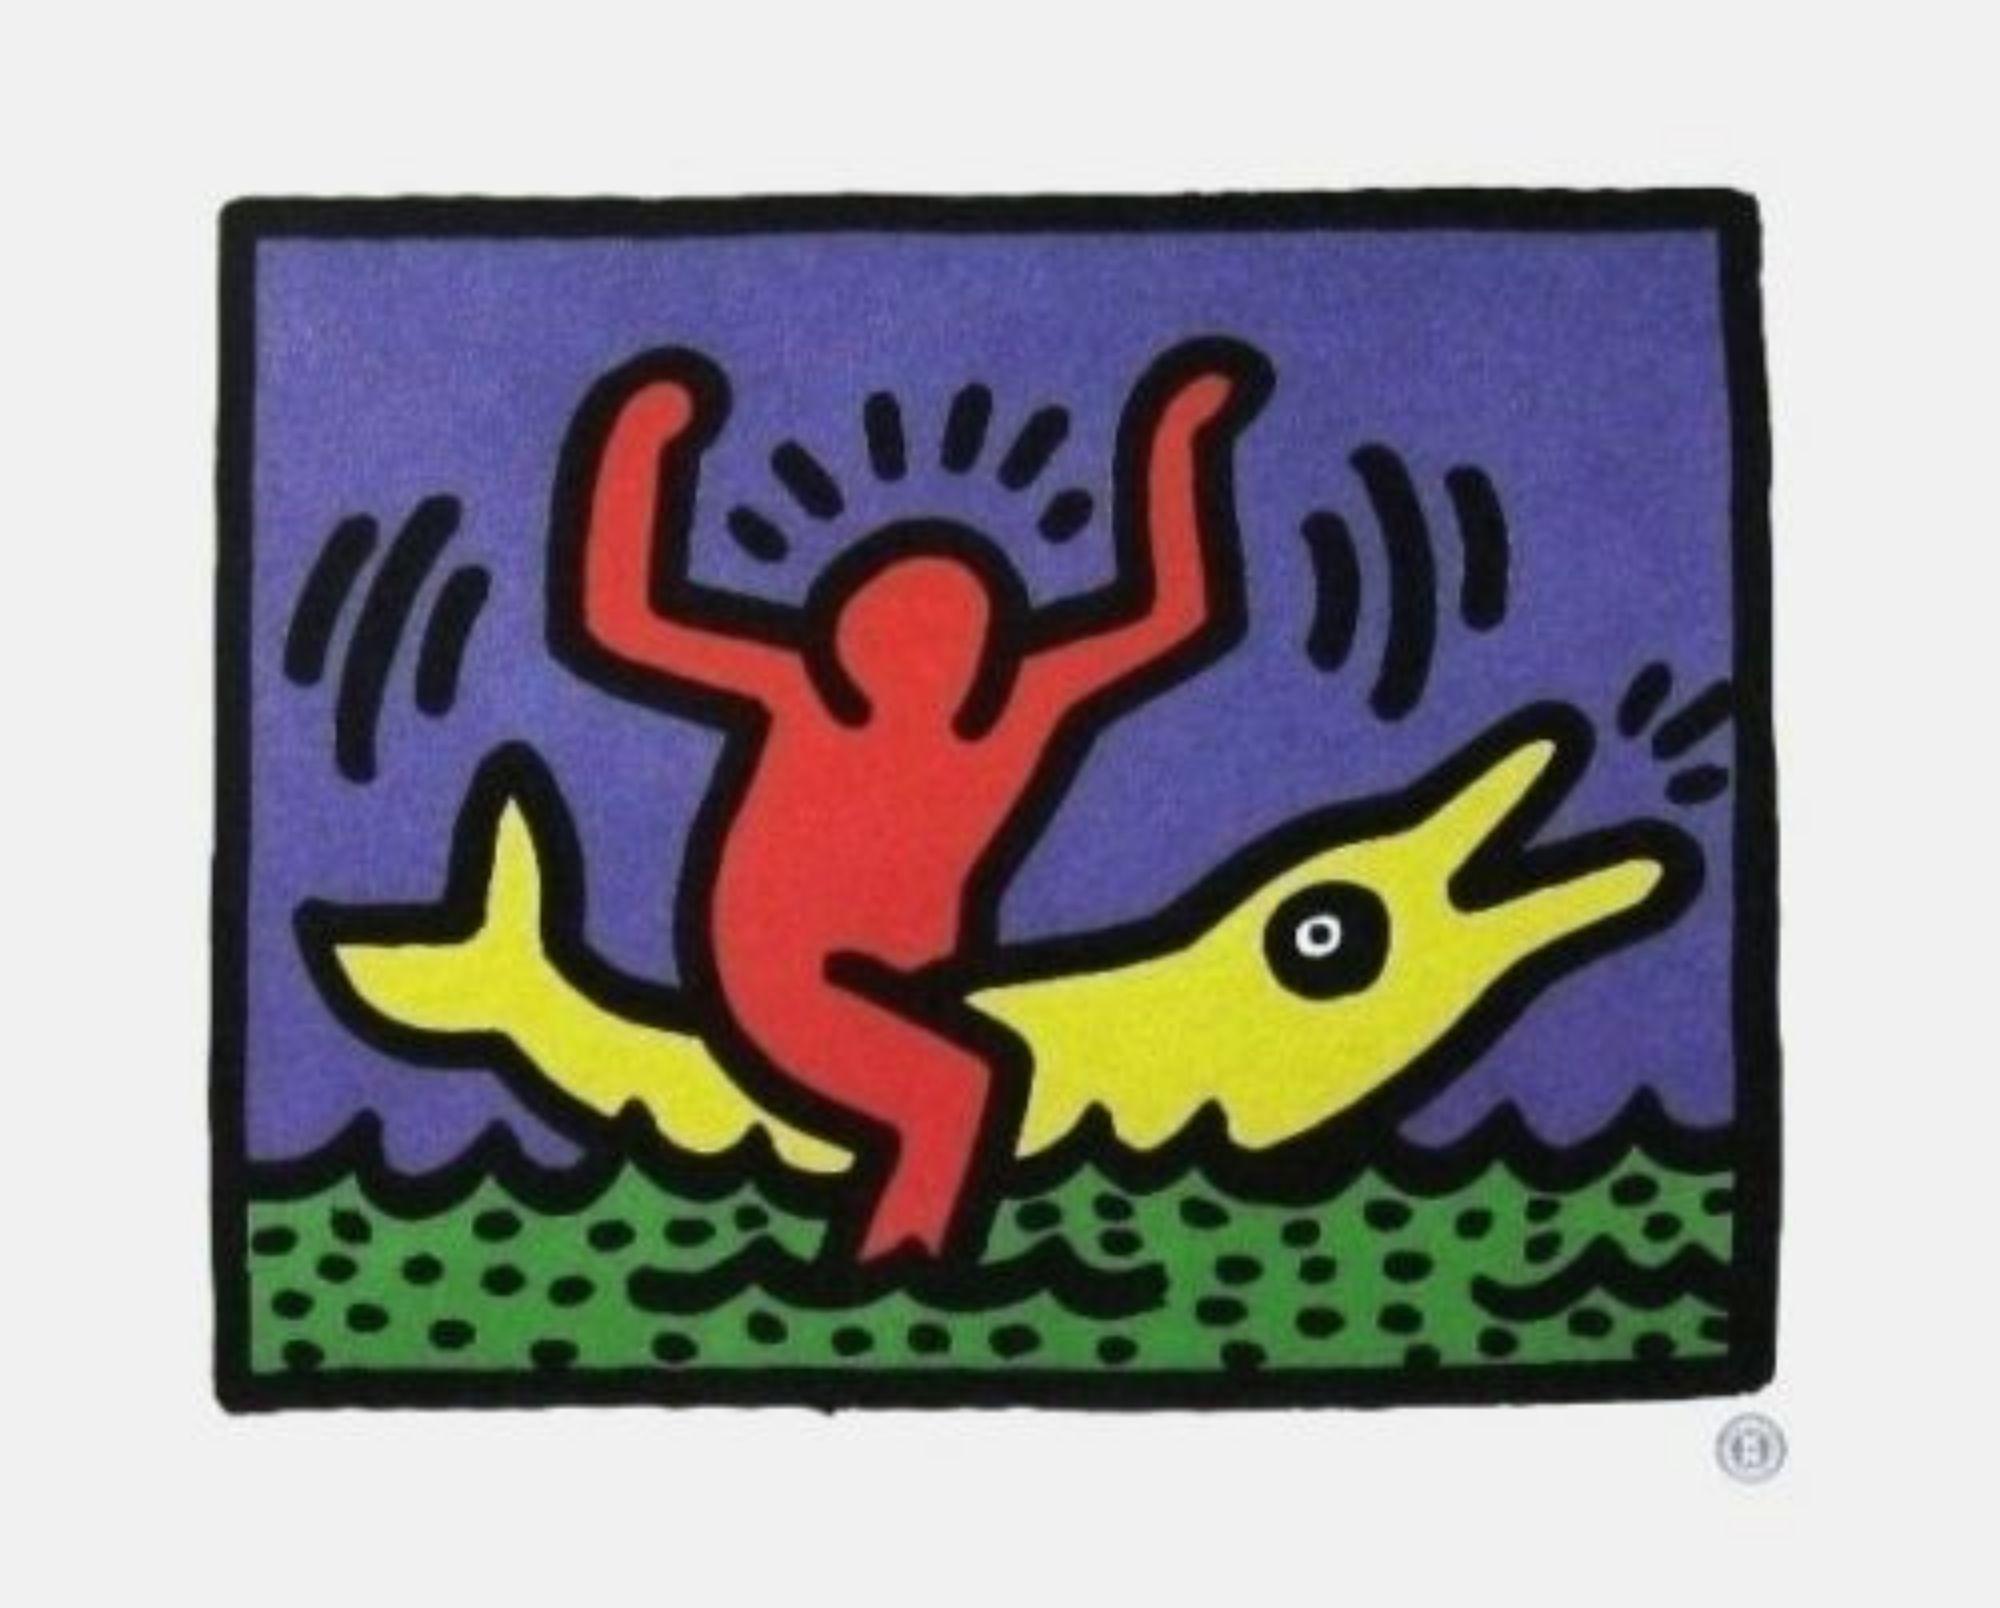 KEITH HARING (1958-1989) A leading Neo-Pop artist, was one of the most articulate members of his generation. He captivated the imaginations of New York City commuters with his subway wall drawings in the early 1980s, and later exhibited his works in